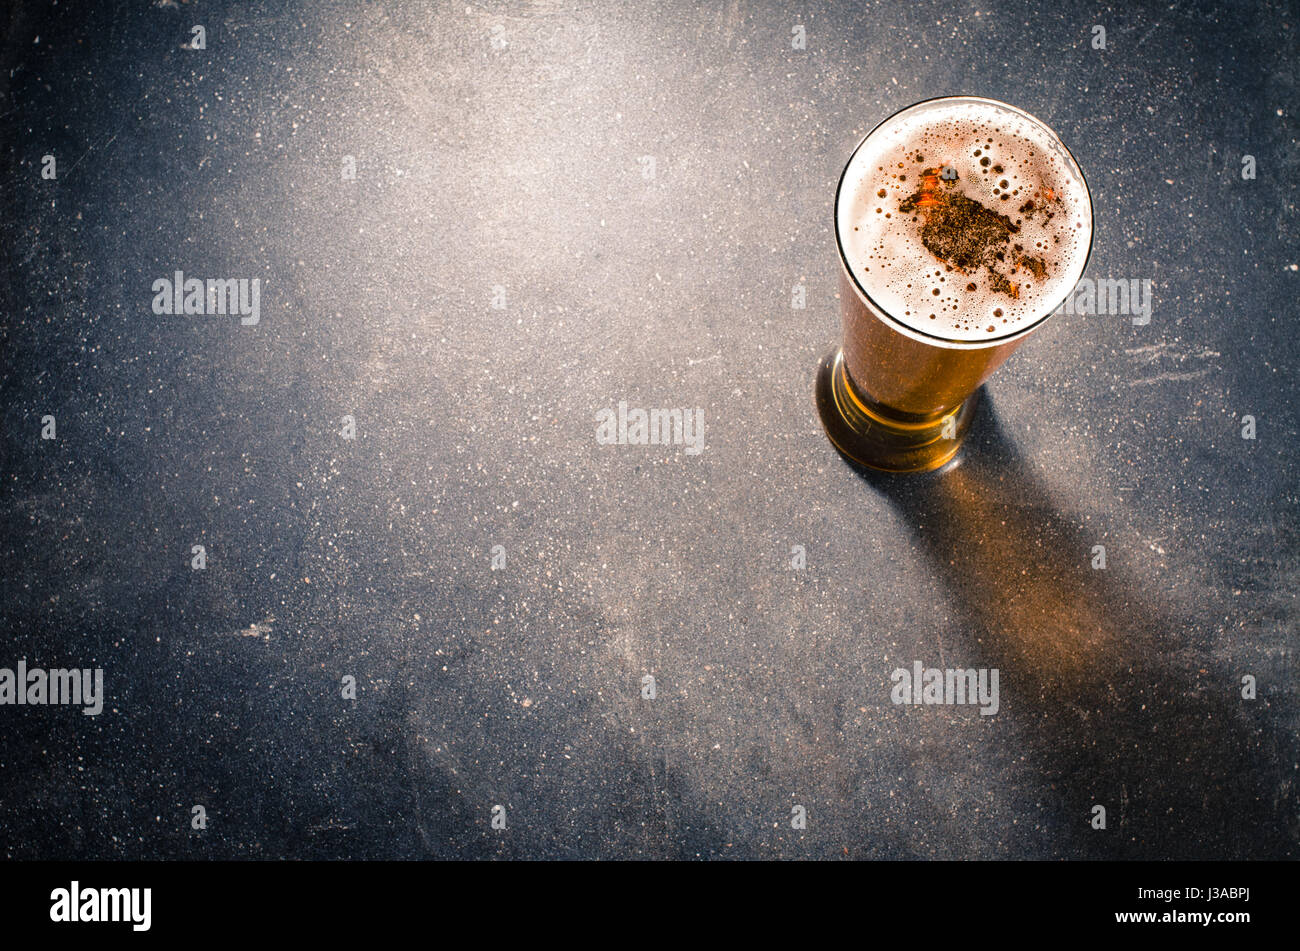 Beer glass on dark table Stock Photo